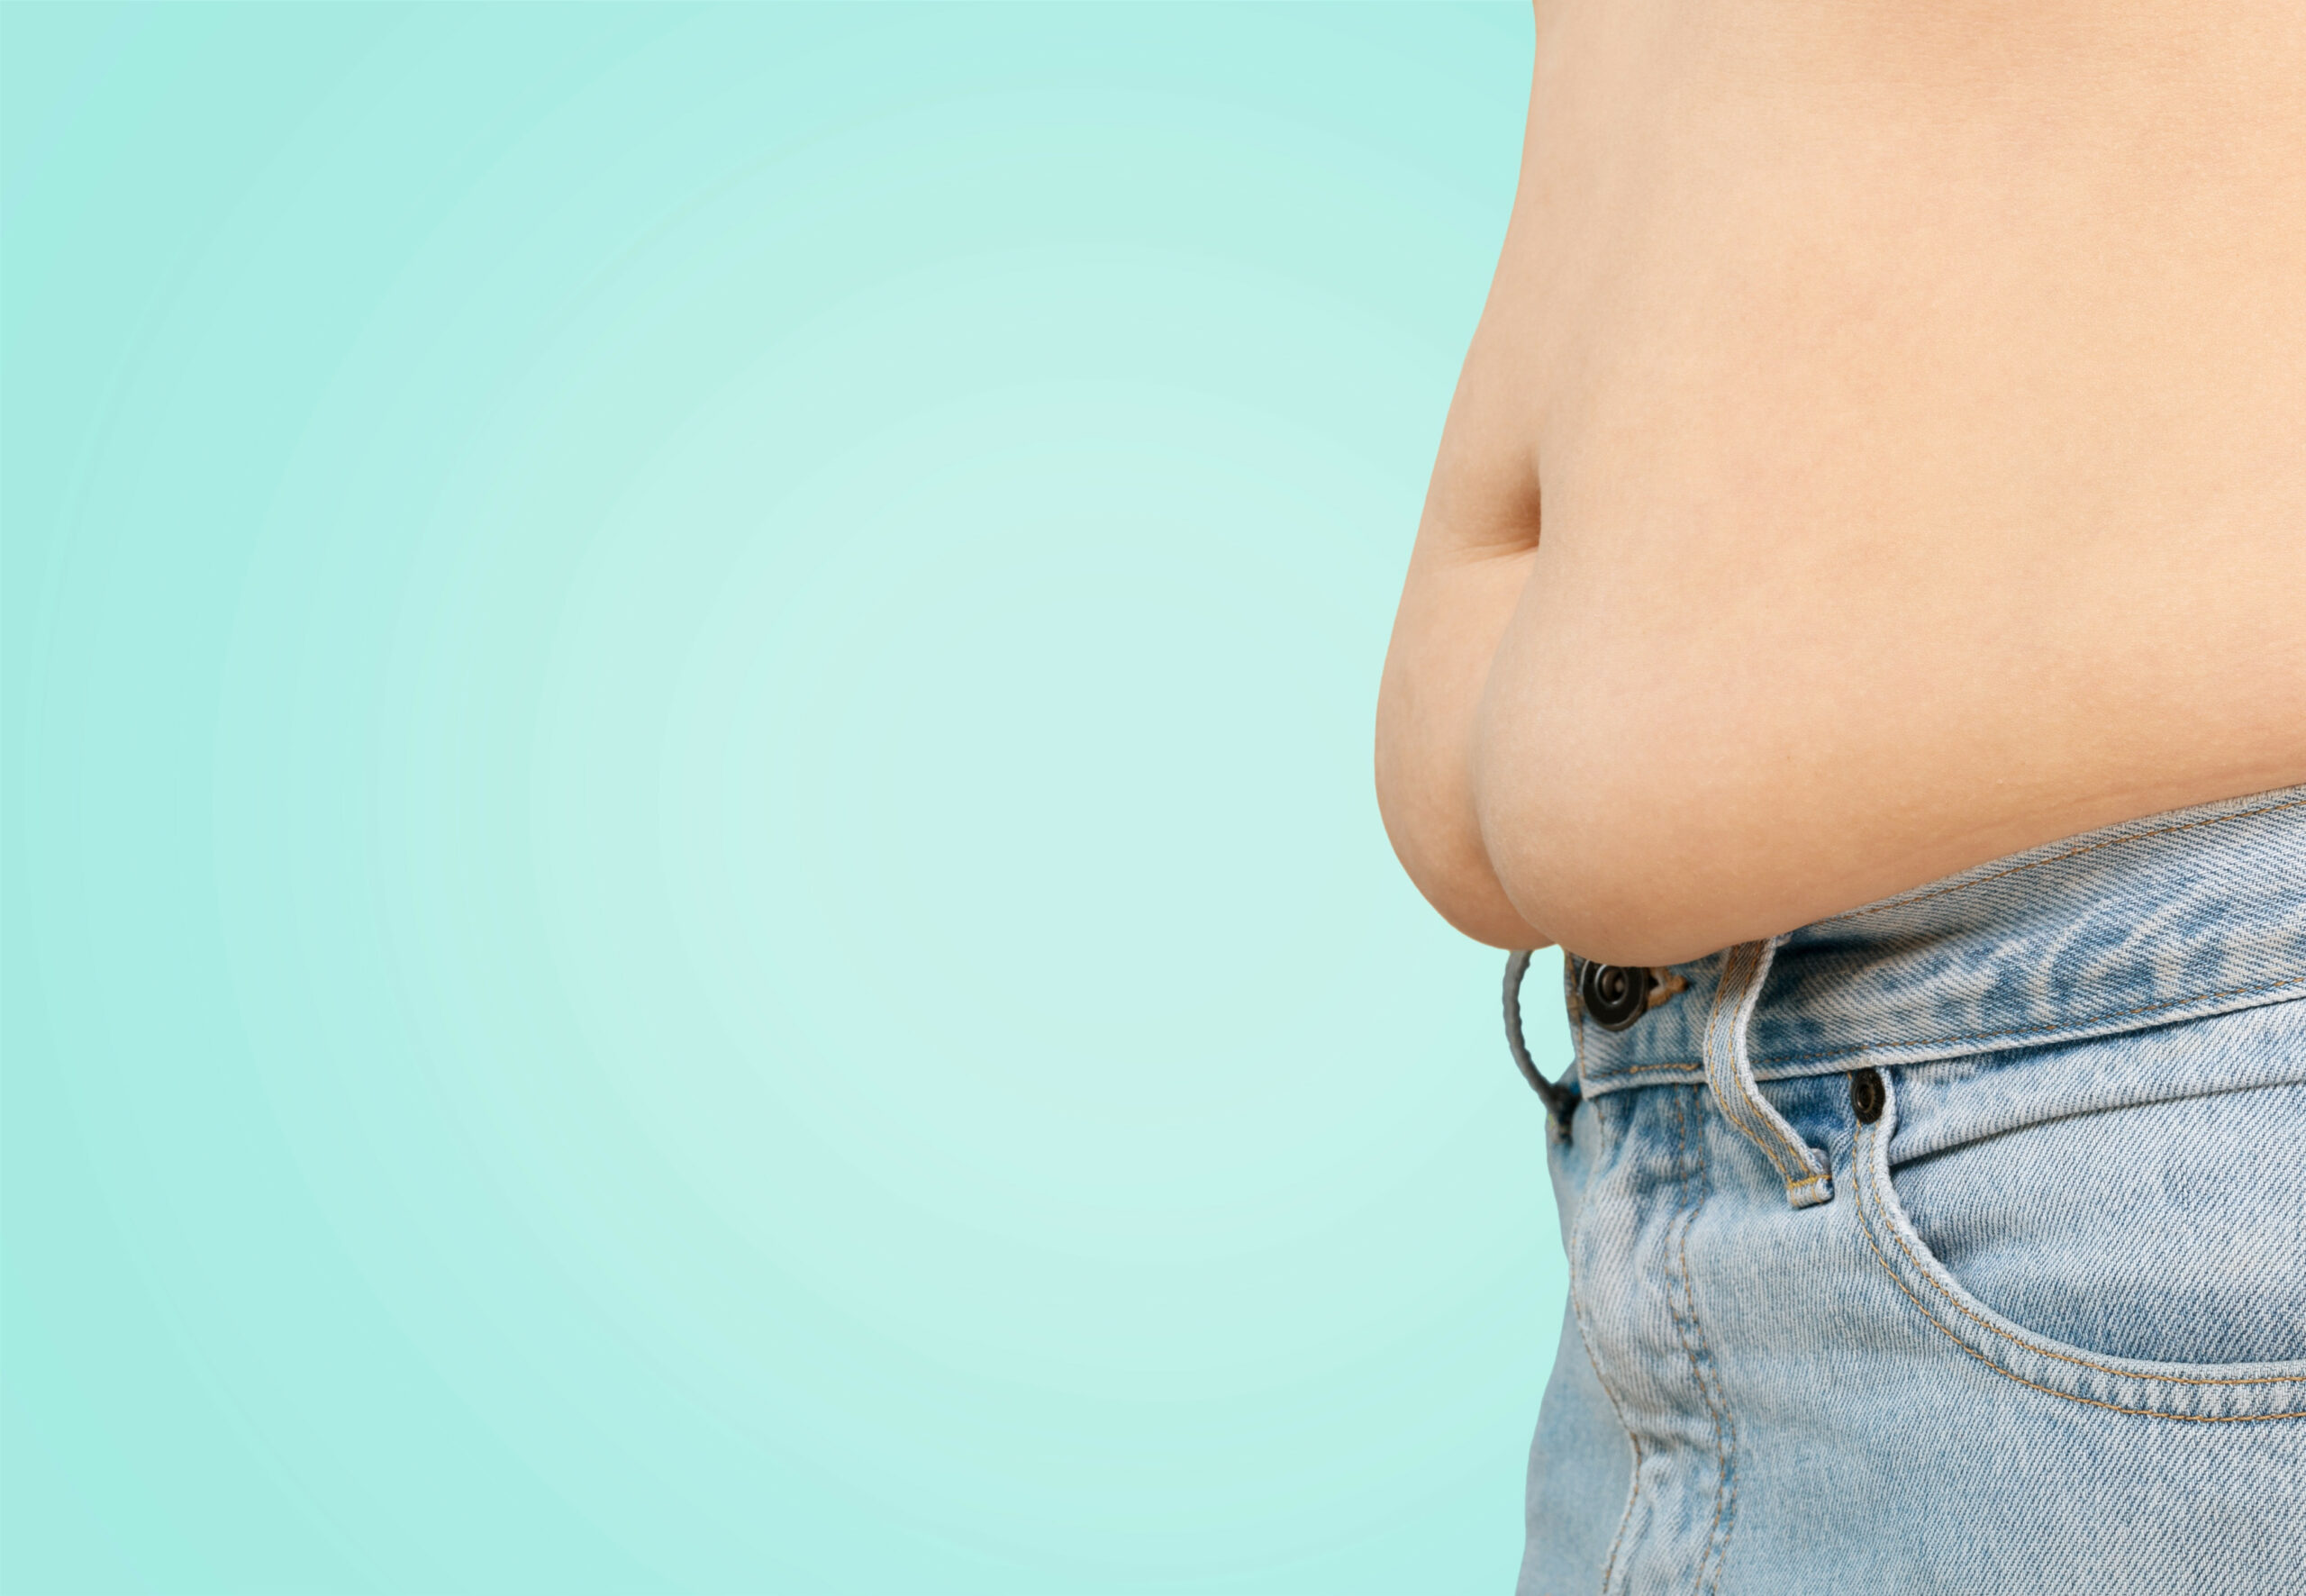 Why is it more dangerous to have belly fat?